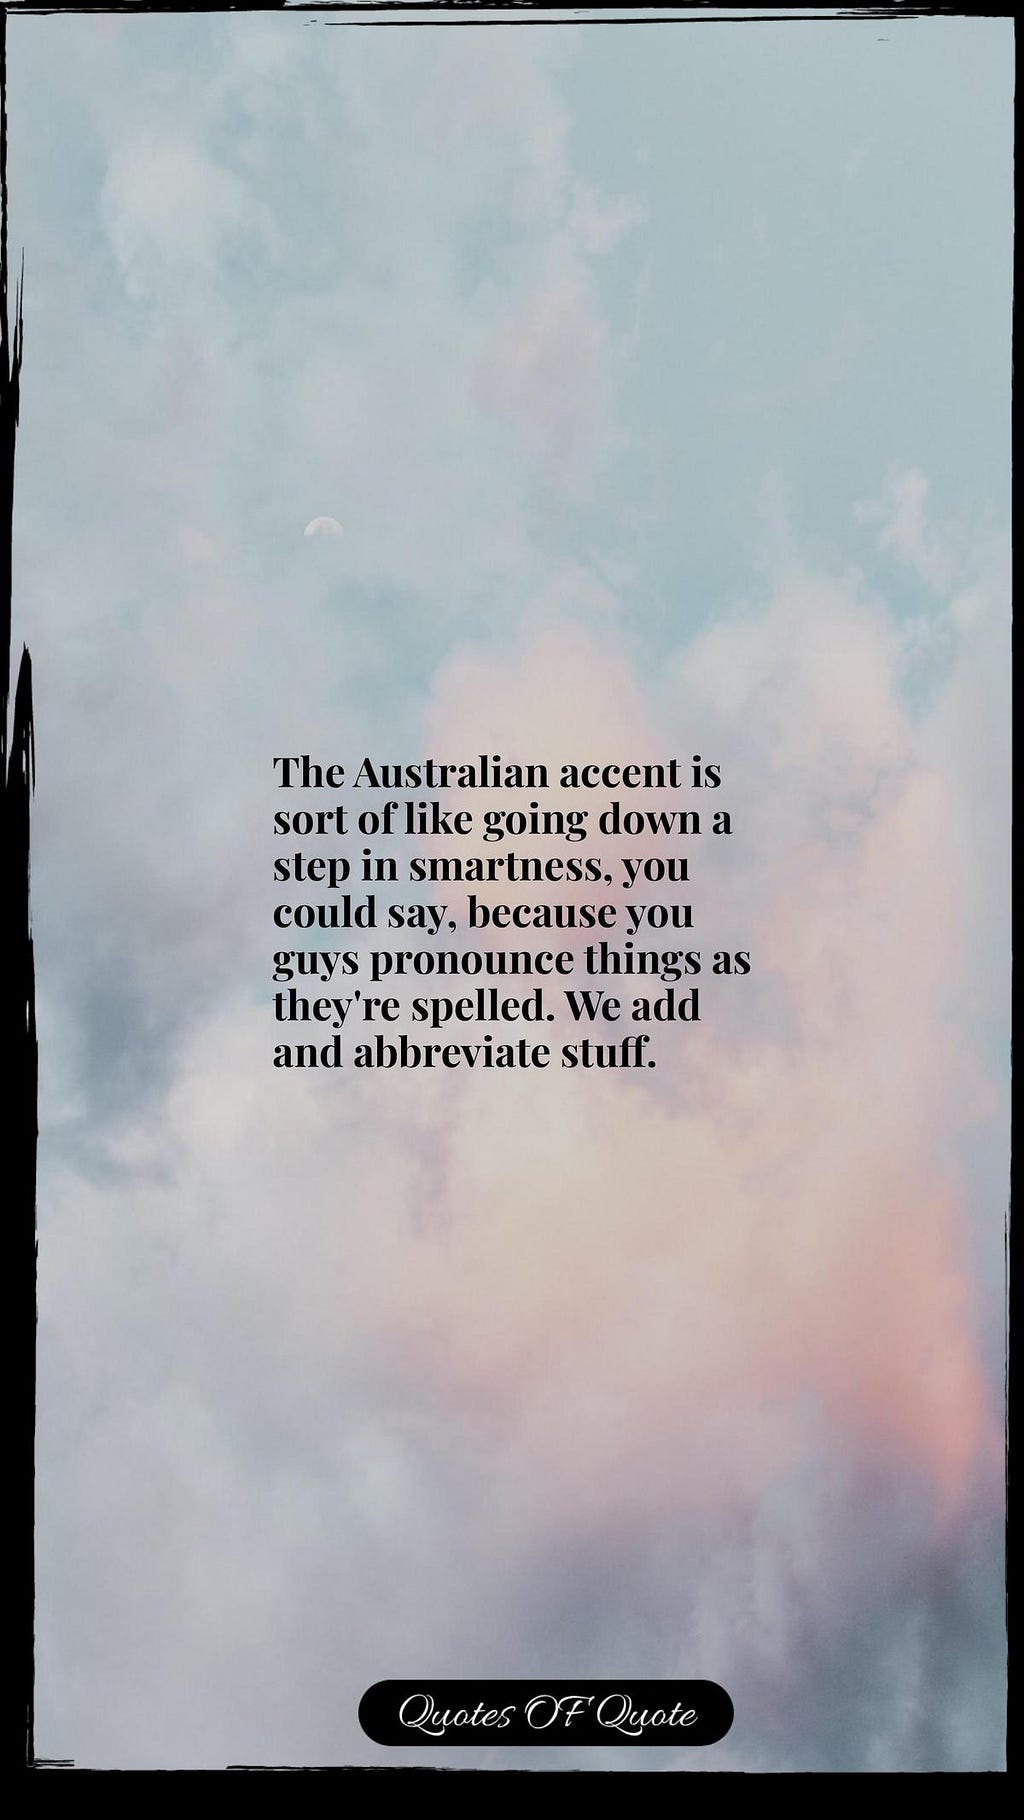 The Australian accent is sort of like going down a step in smartness, you could say, because you guys pronounce things as they're spelled. We add and abbreviate stuff.